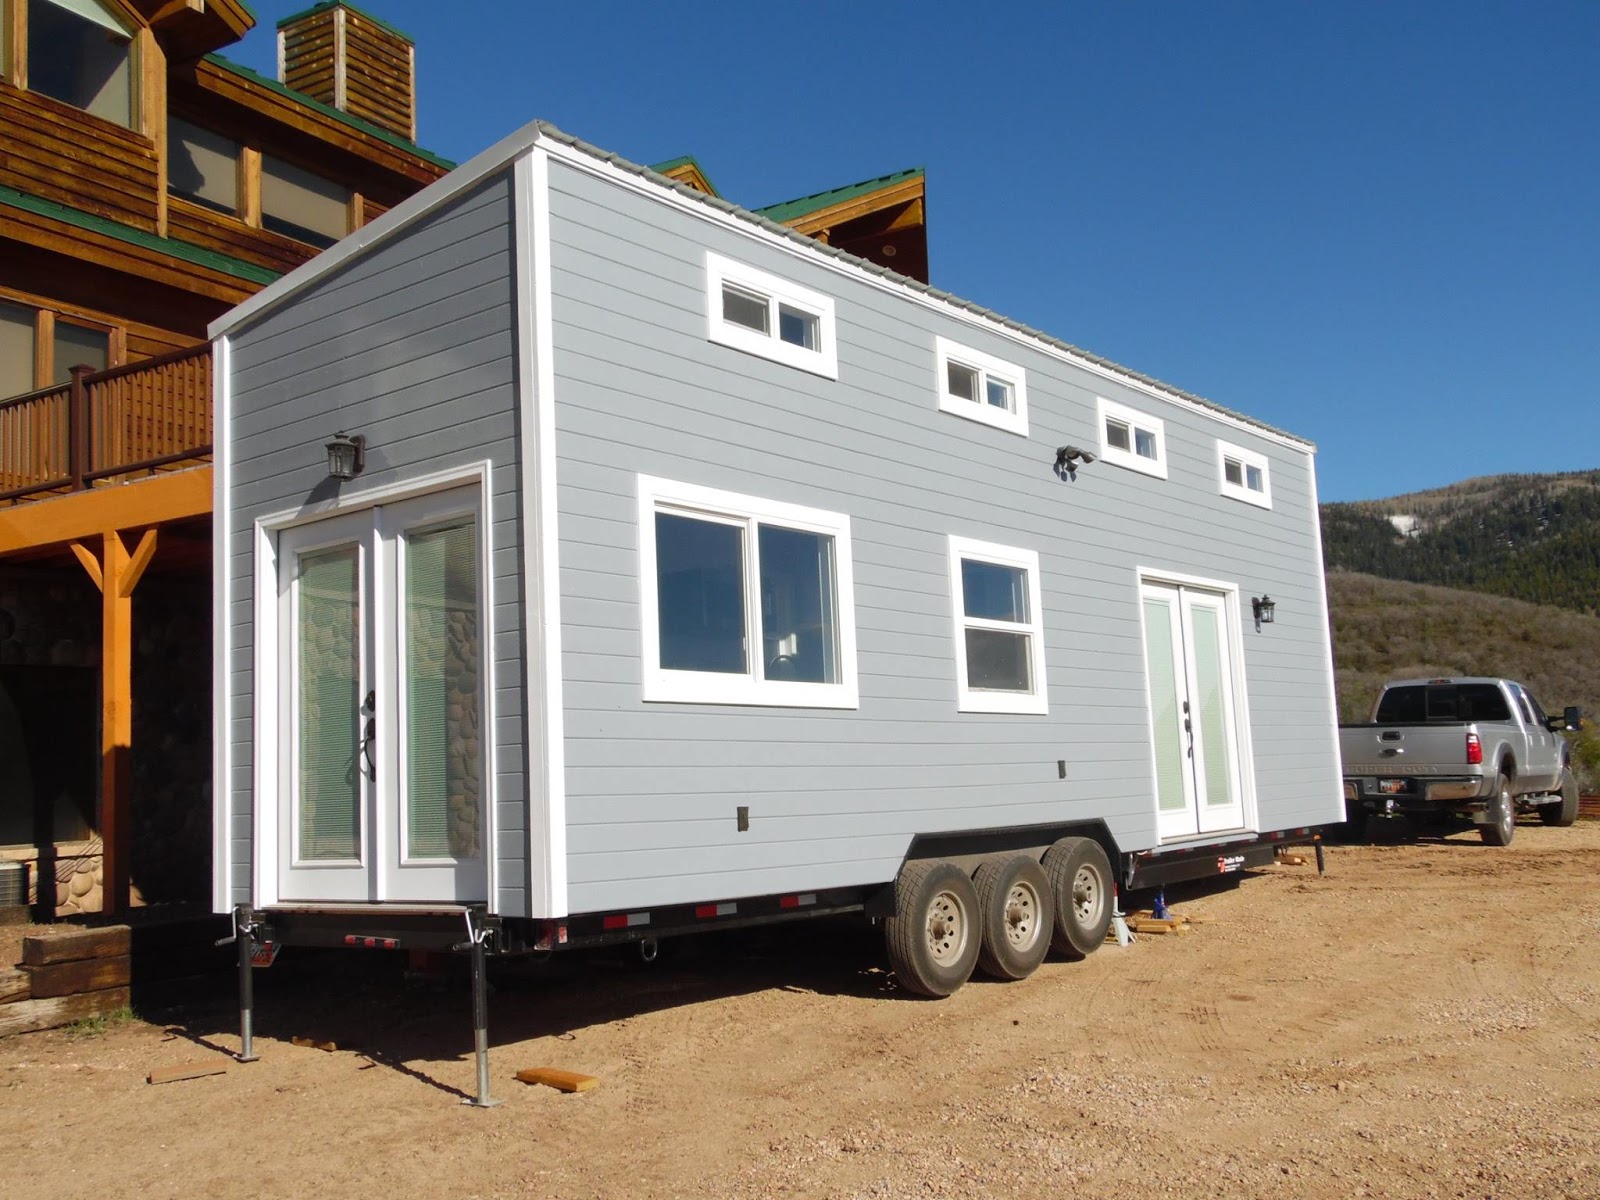  TINY  HOUSE  TOWN The Park  City By Upper Valley Tiny  Homes 